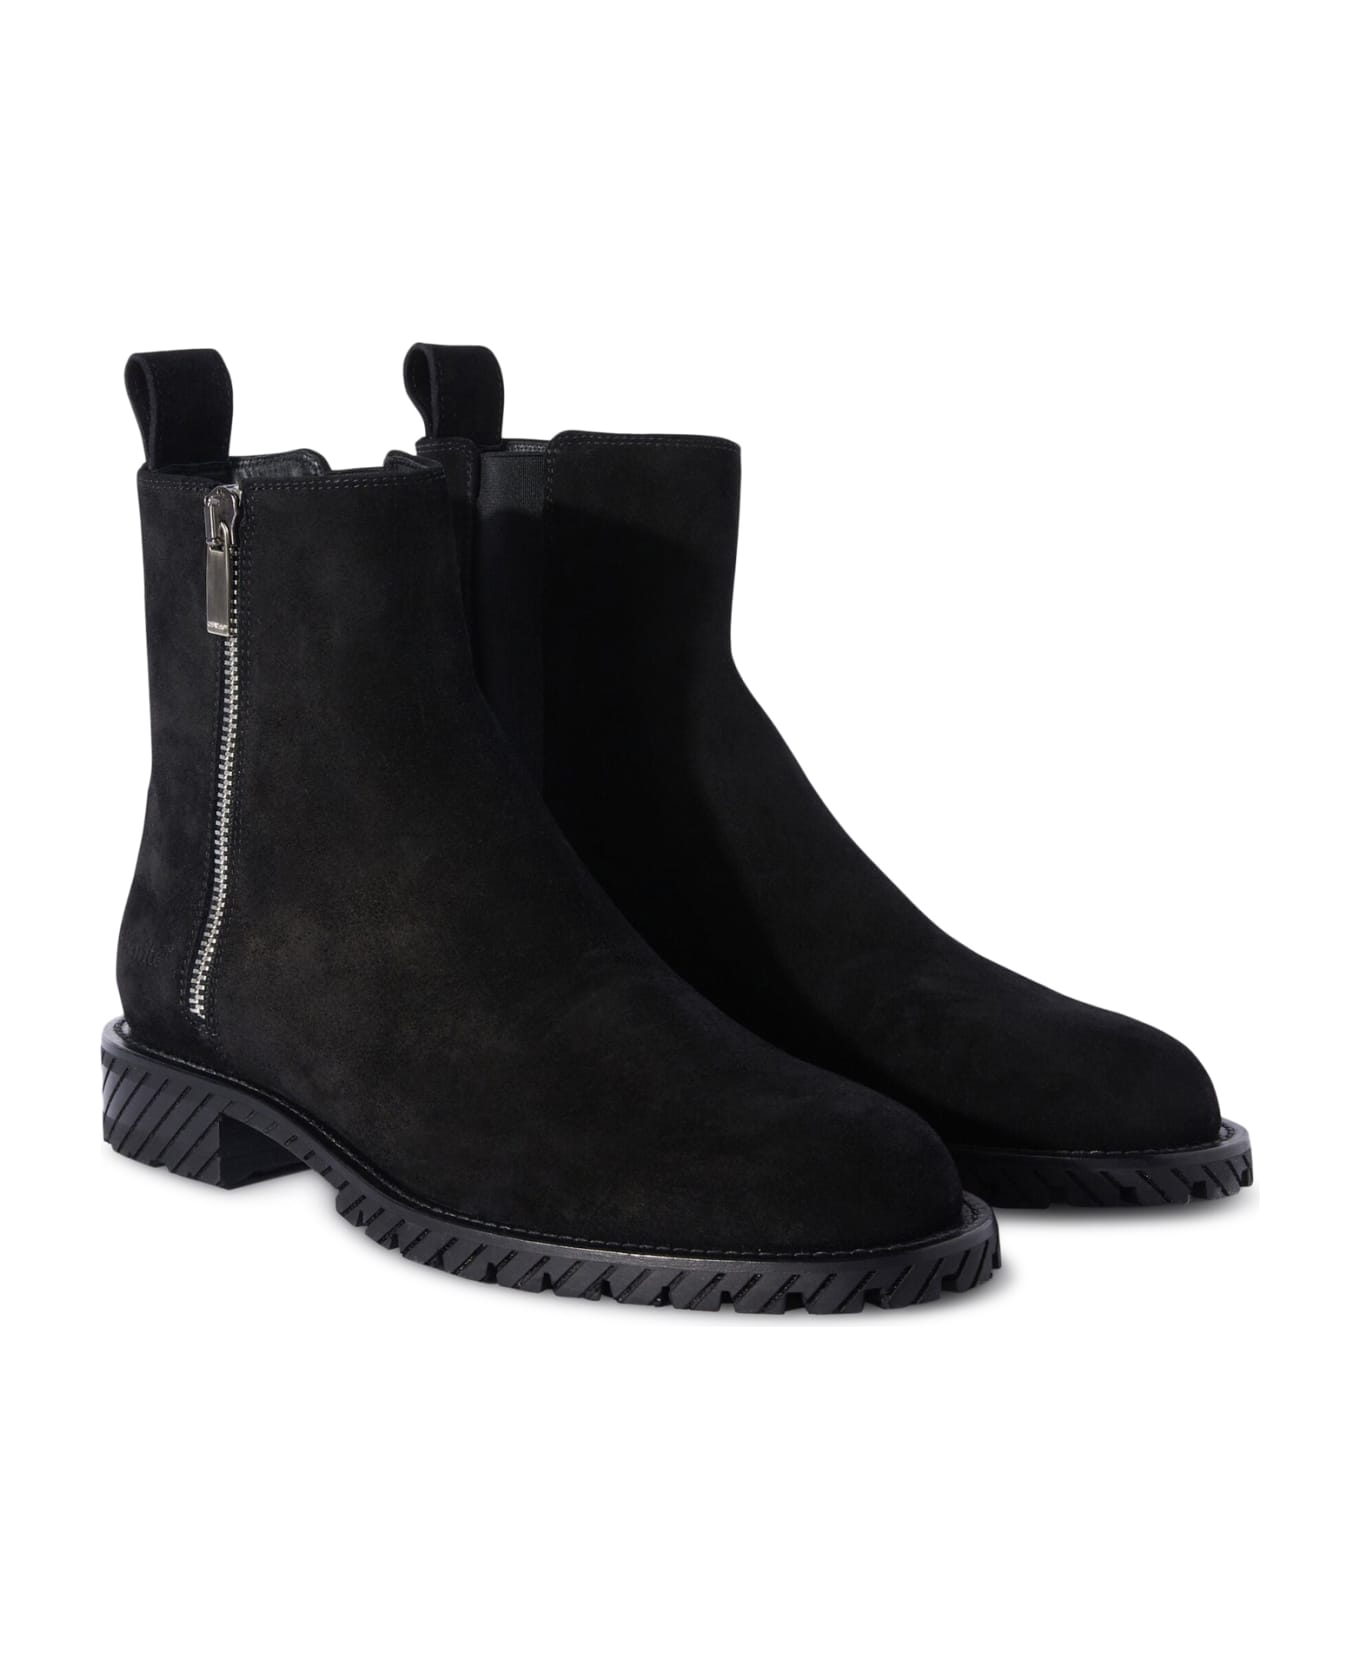 Off-White Military Suede Ankle Boot - Black